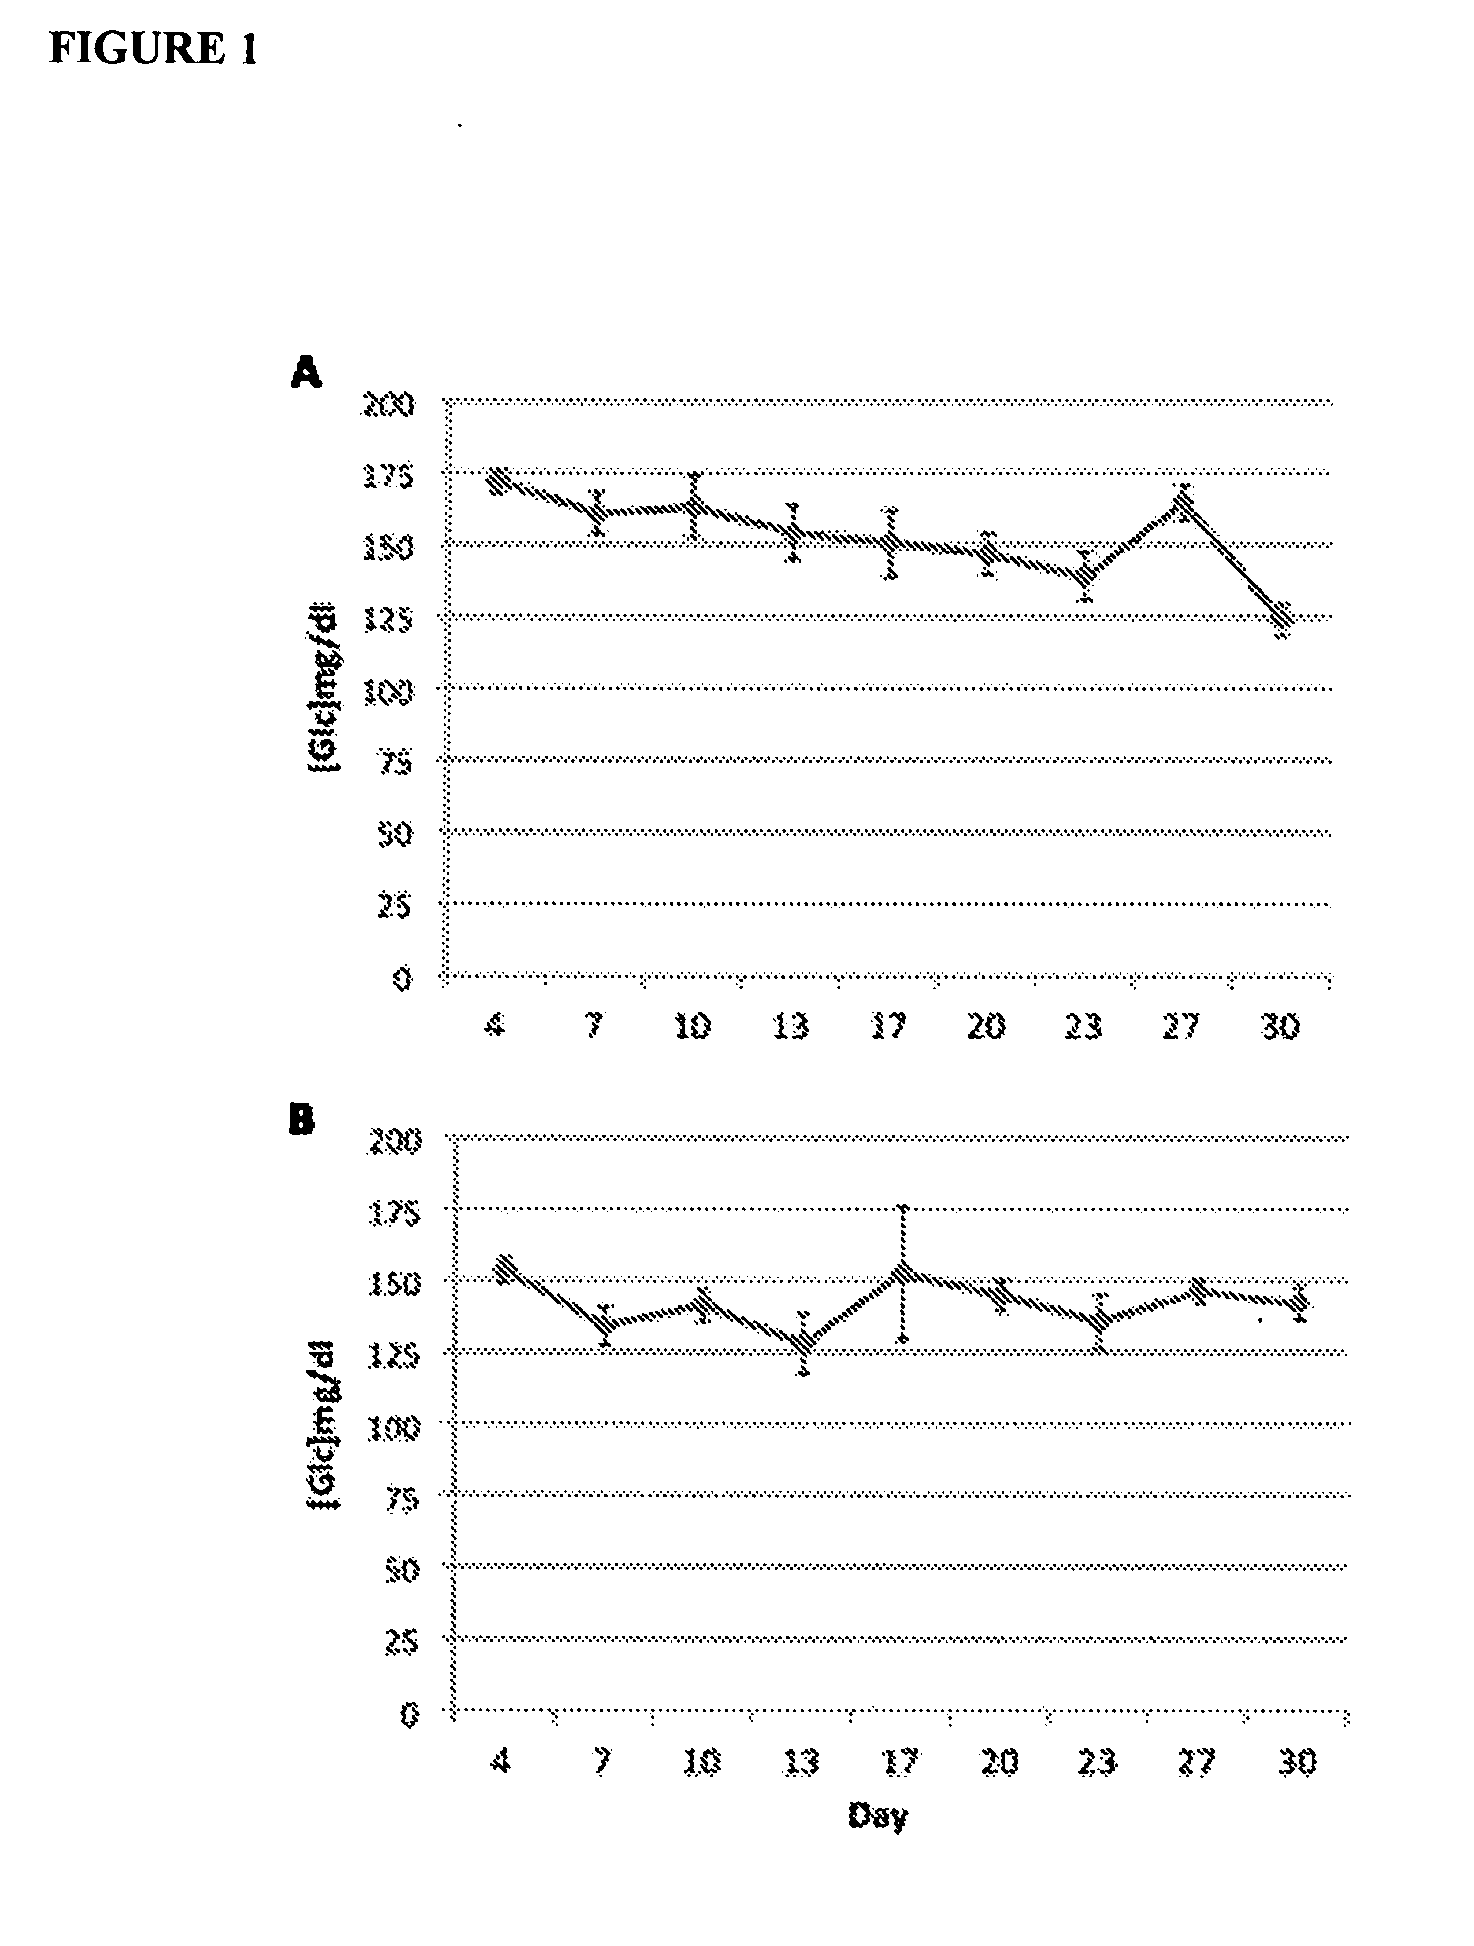 Diazoxide For Use In The Treatment Or Prevention Of A Central Nervous System (CNS) Autoimmune Demyelinating Disease